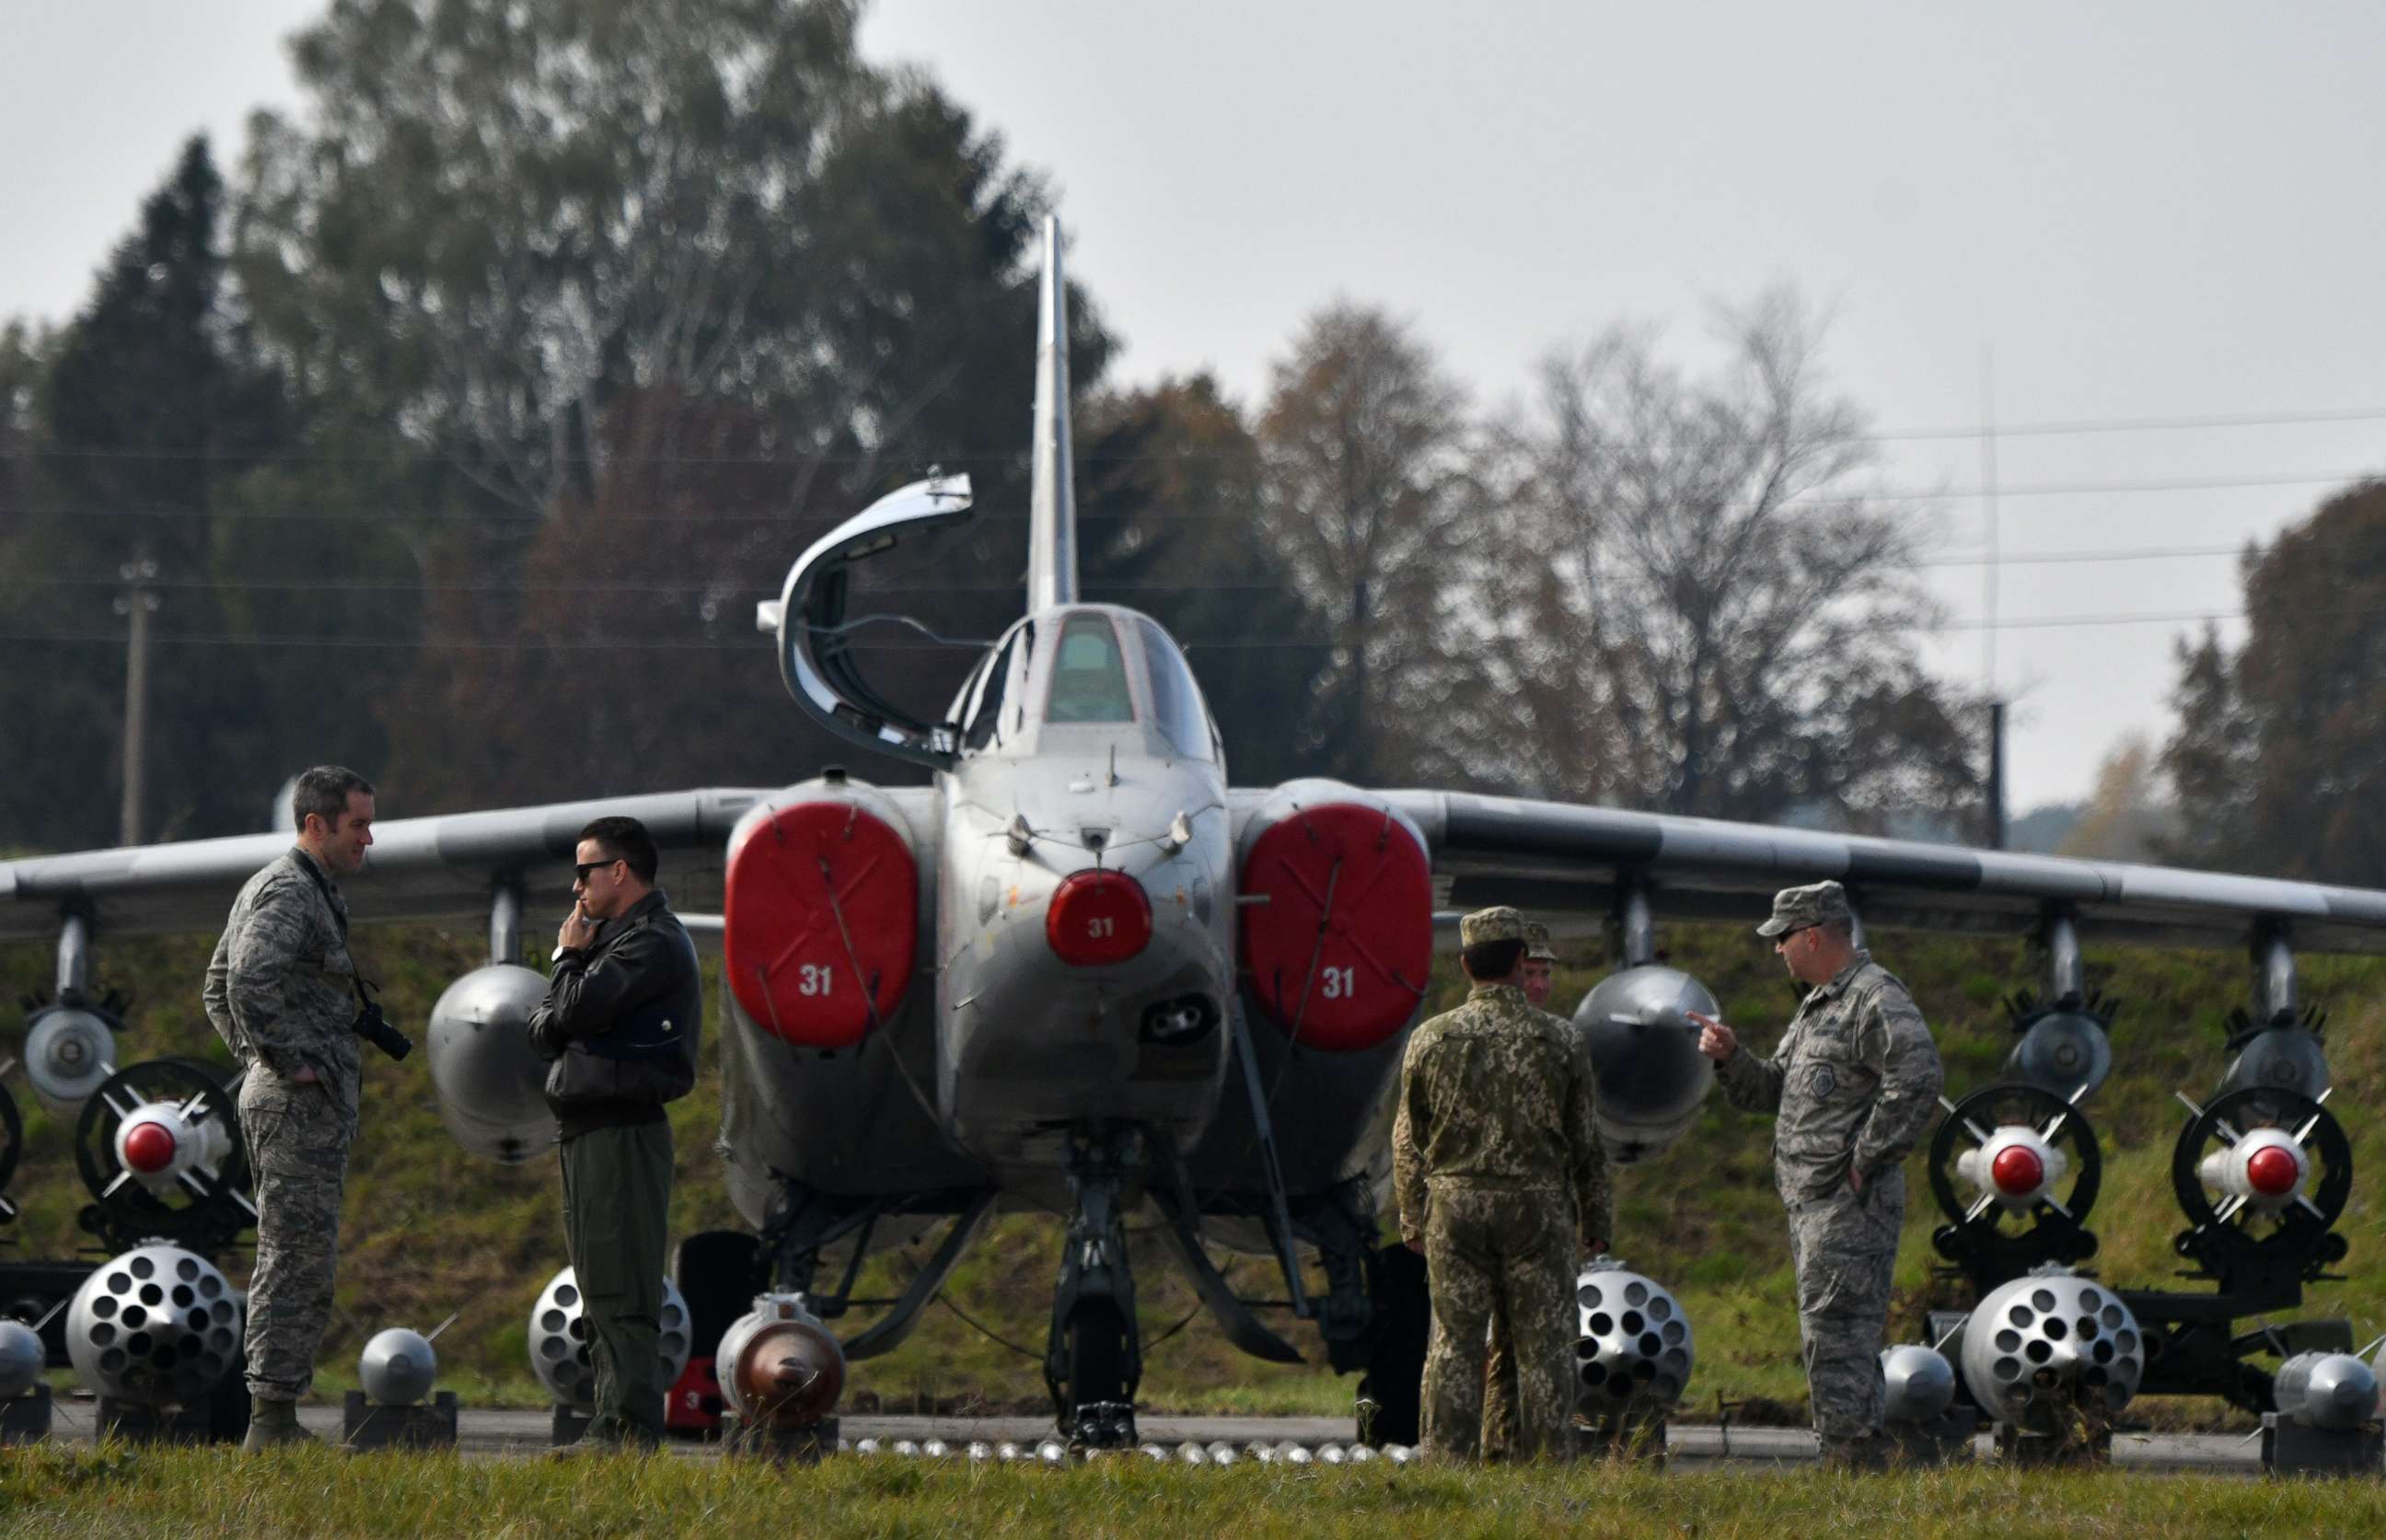 PHOTO: Ukrainian and US servicemen speak together in front of the Ukrainian SU-25 low-flying attack aircraft during an air force exercise on Starokostyantyniv military airbase on October 12, 2018.